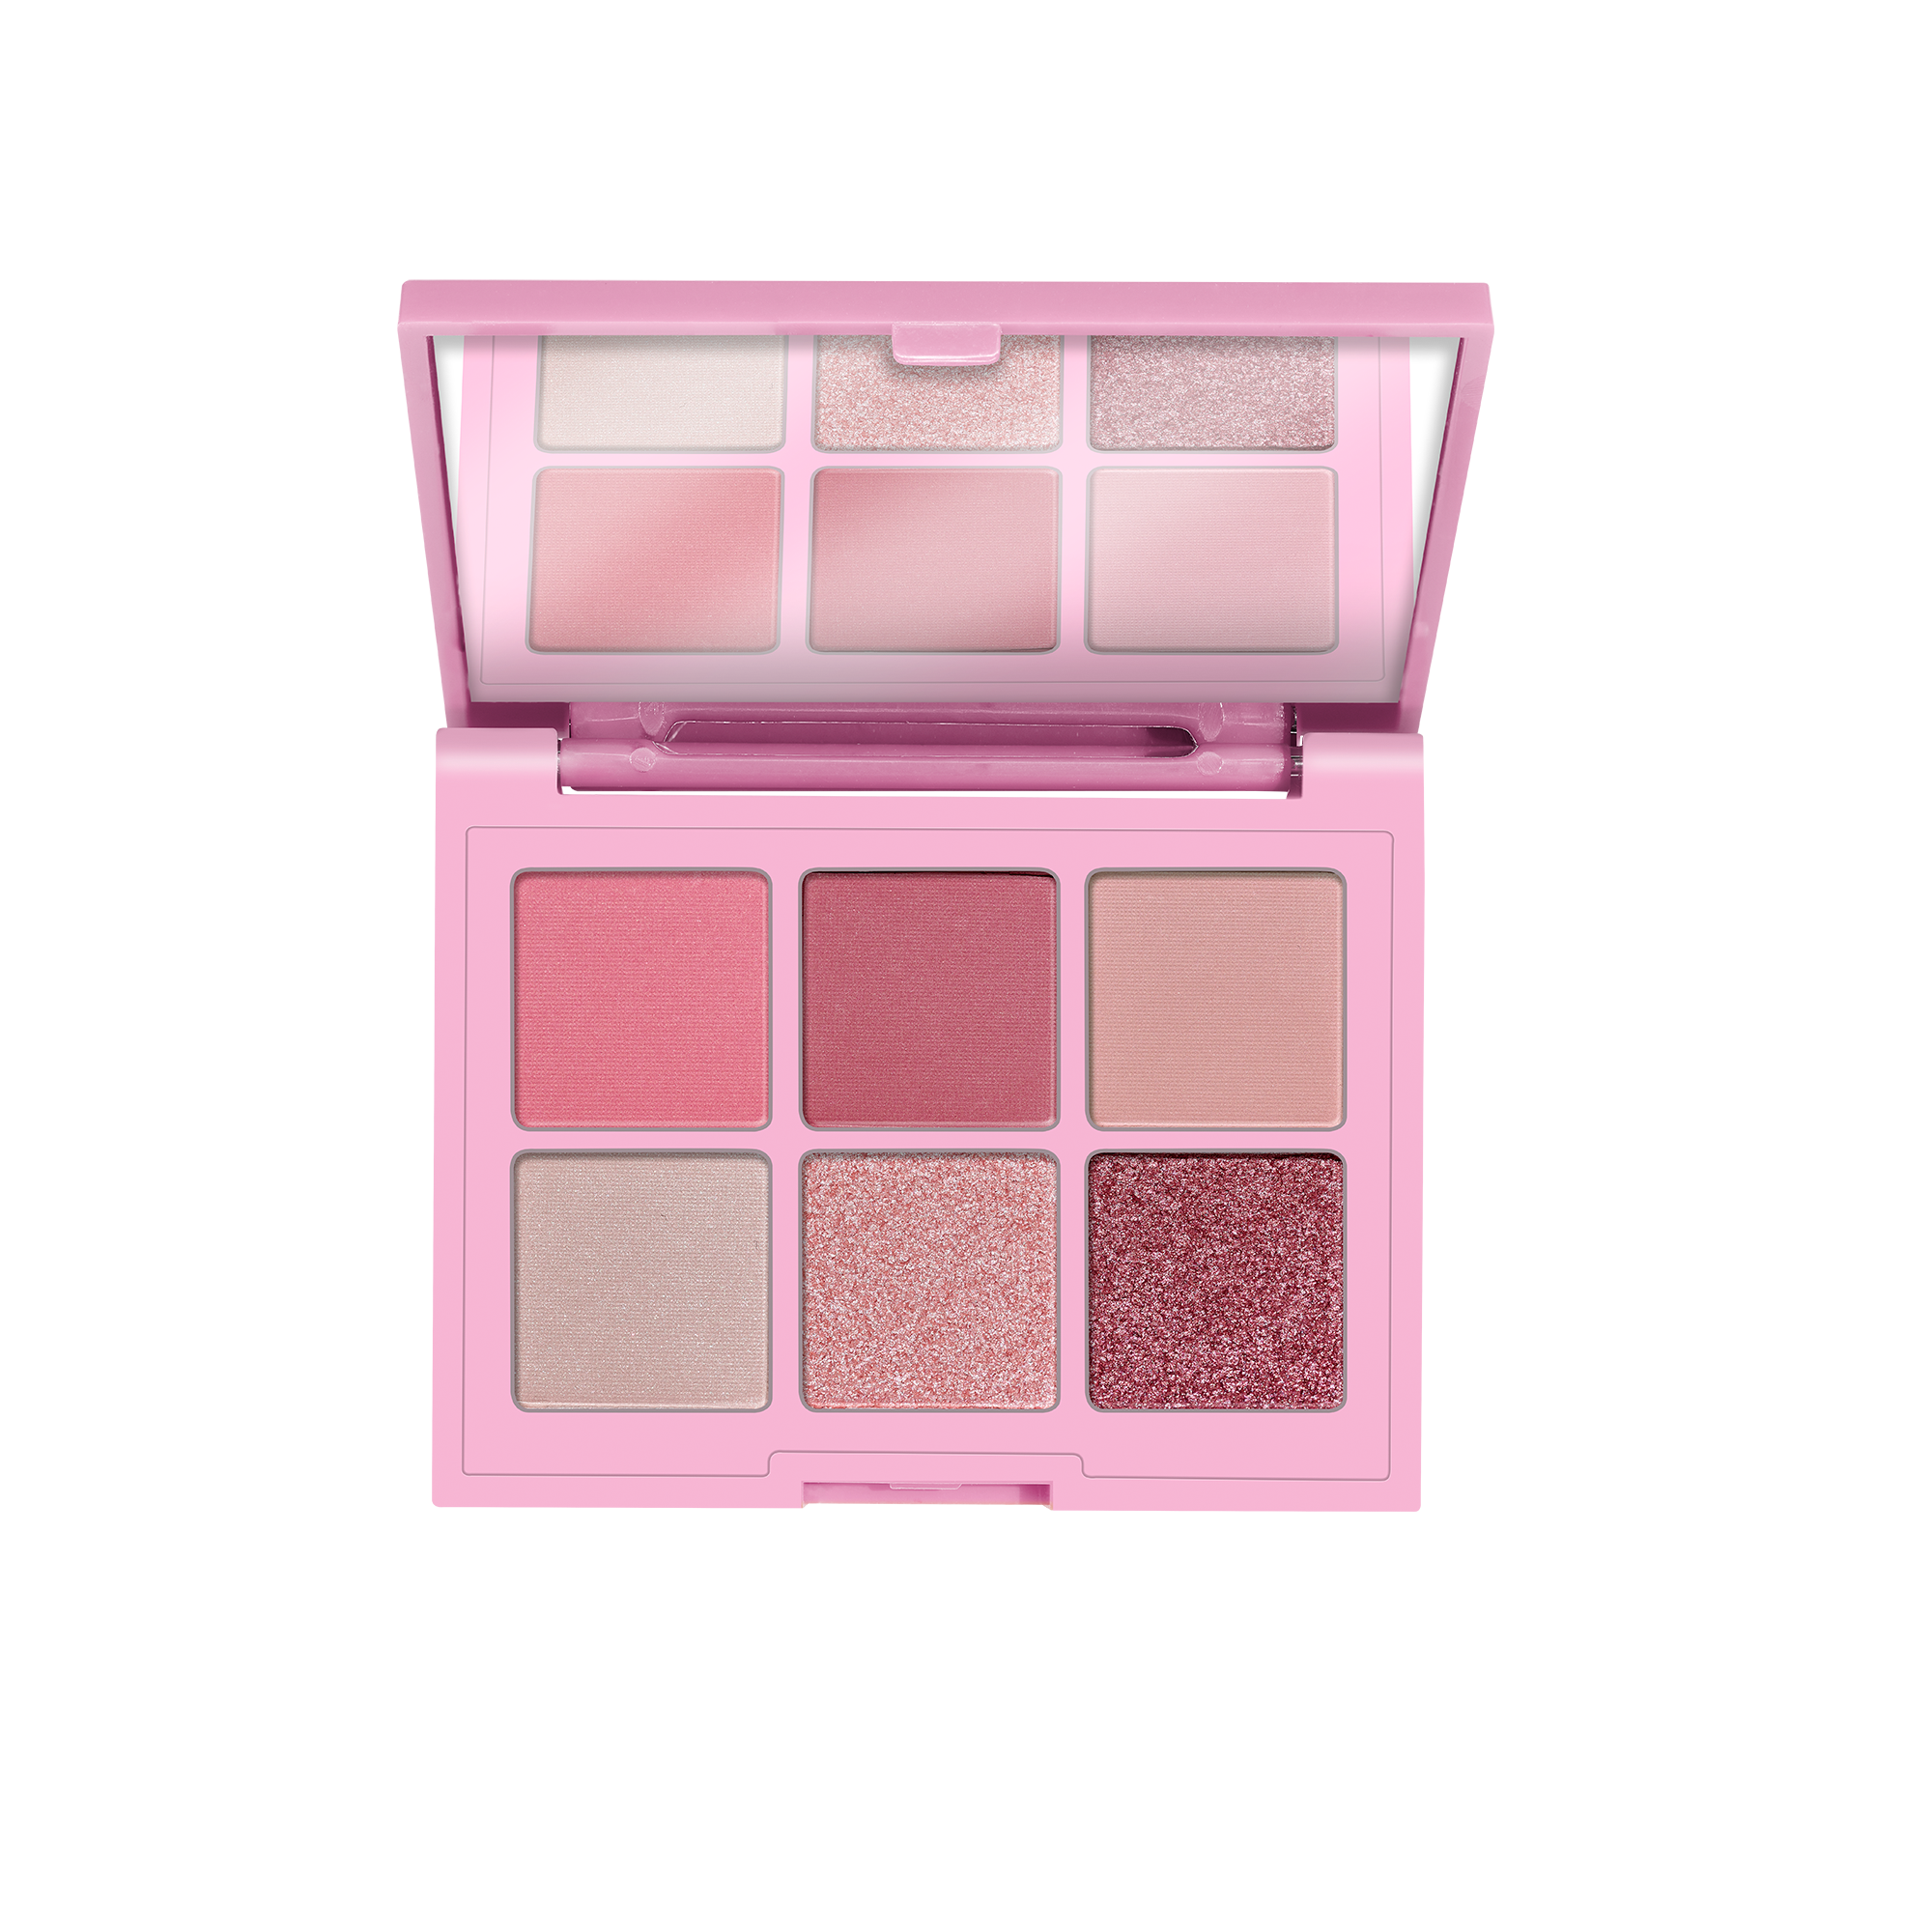 my ROSE will go on eyeshadow palette – essence makeup